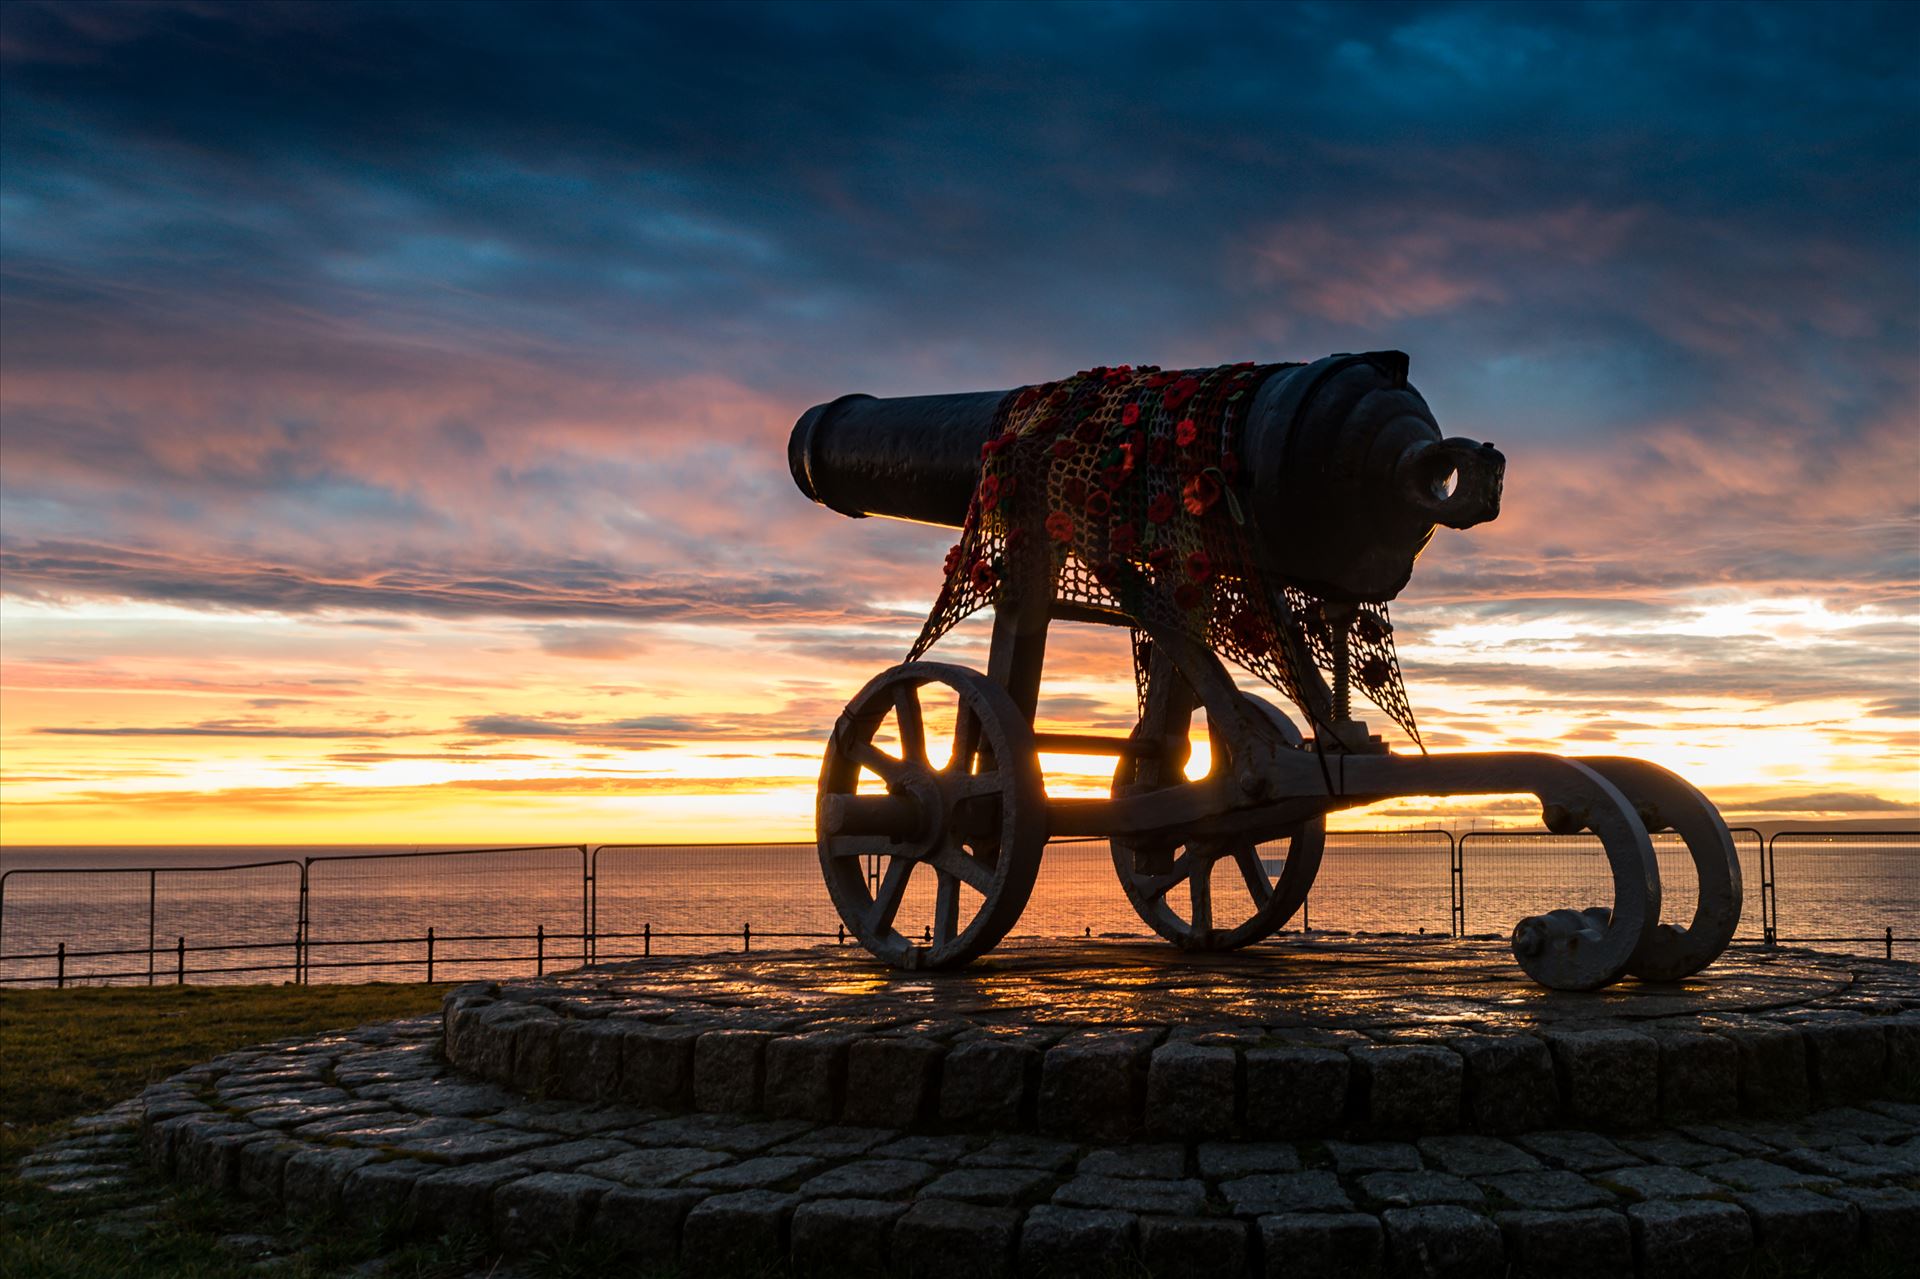 Cannon Sunrise The Cannon at Hartlepool Headland at sunrise by AJ Stoves Photography